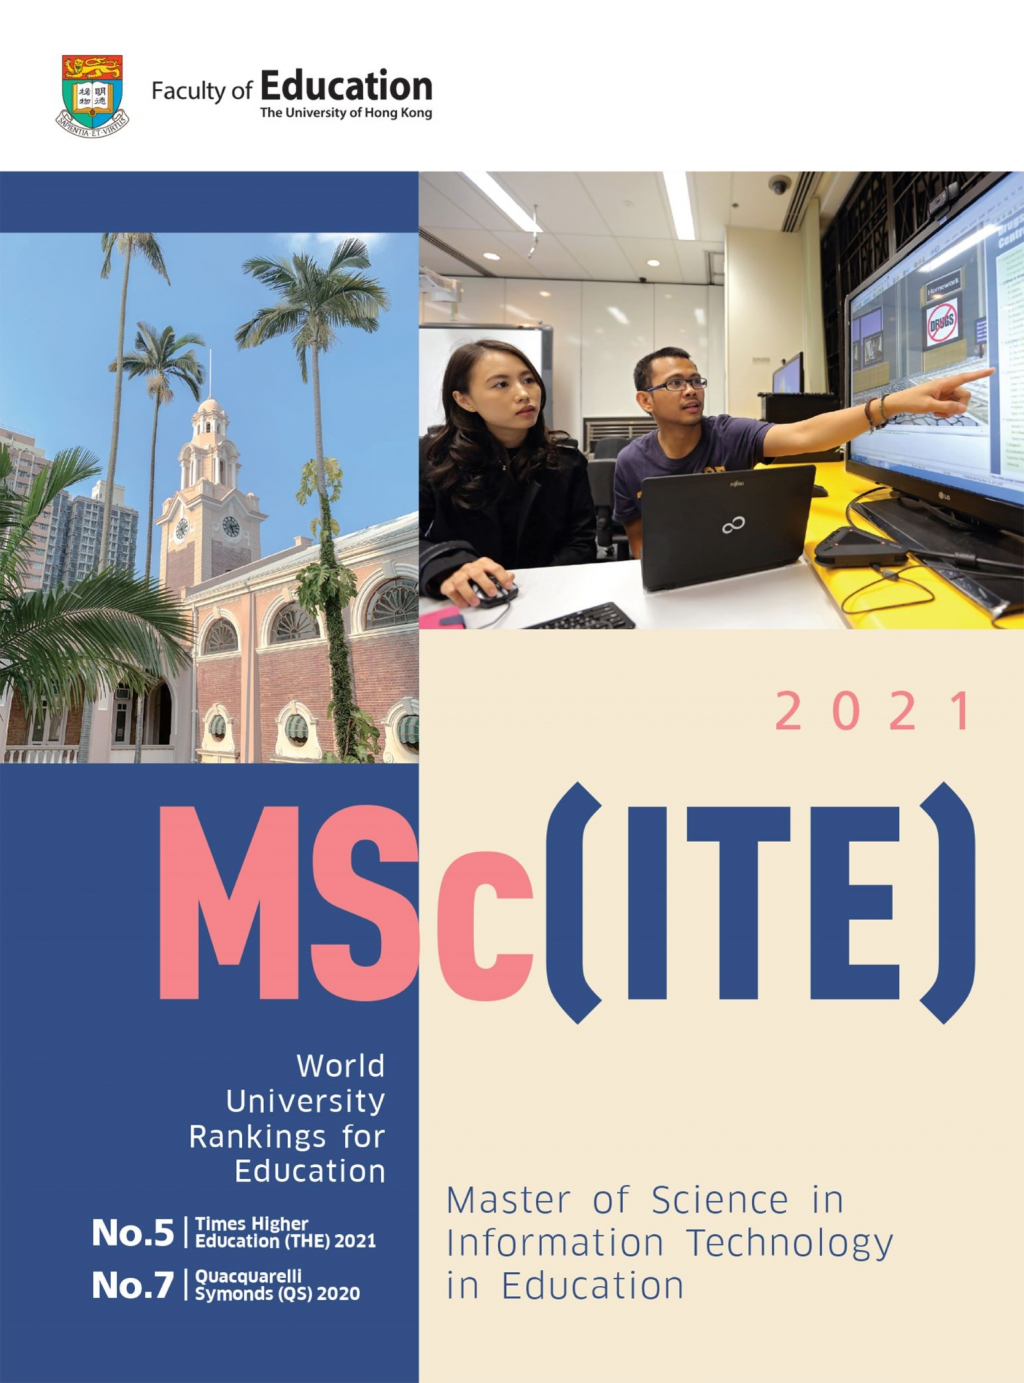 Application of Master of Science in Information Technology in Education [MSc(ITE)]